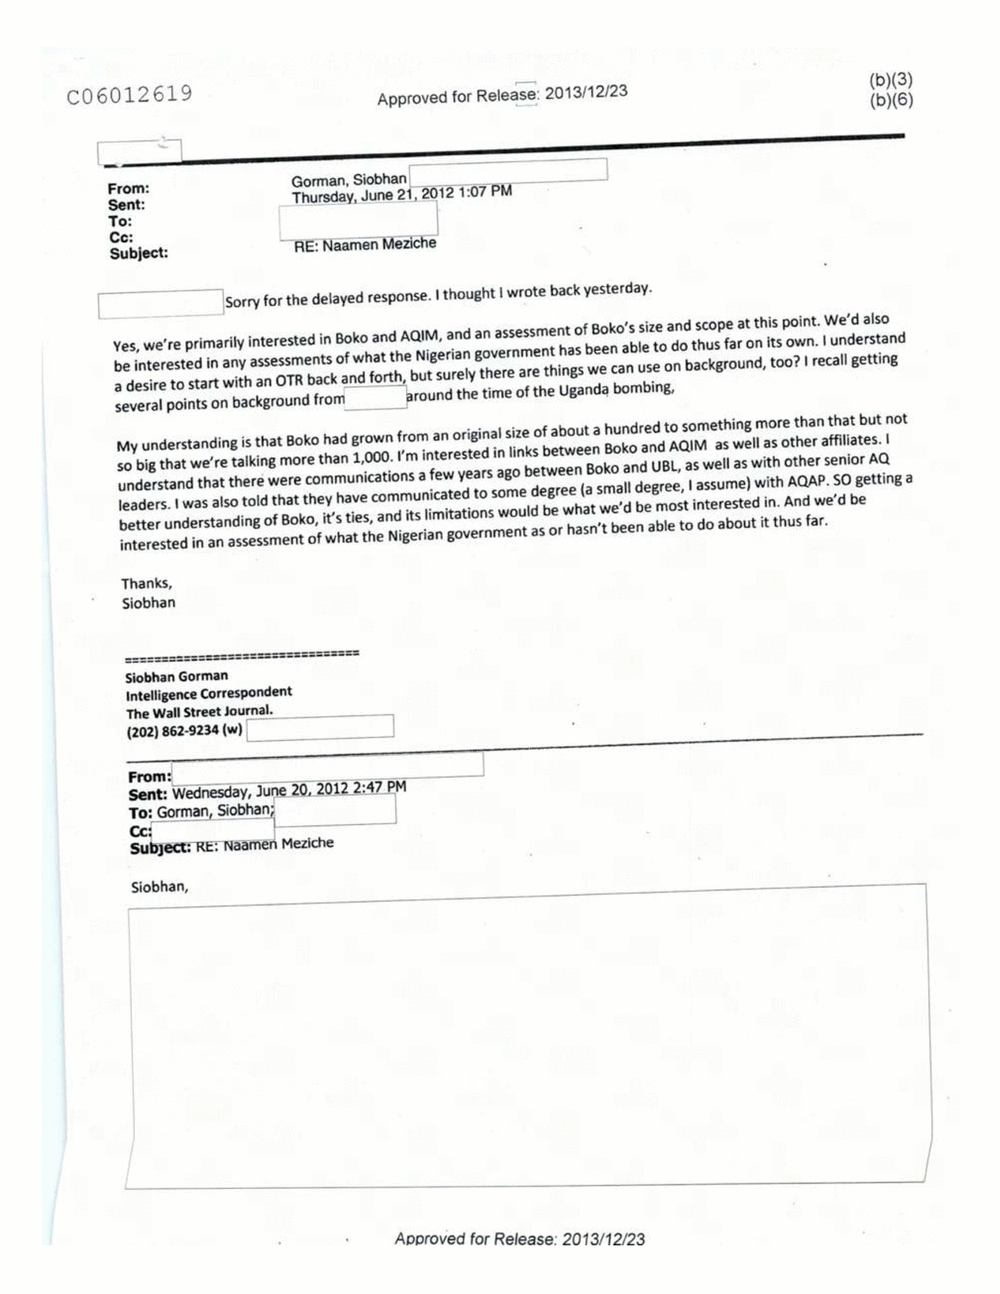 Page 165 from Email Correspondence Between Reporters and CIA Flacks